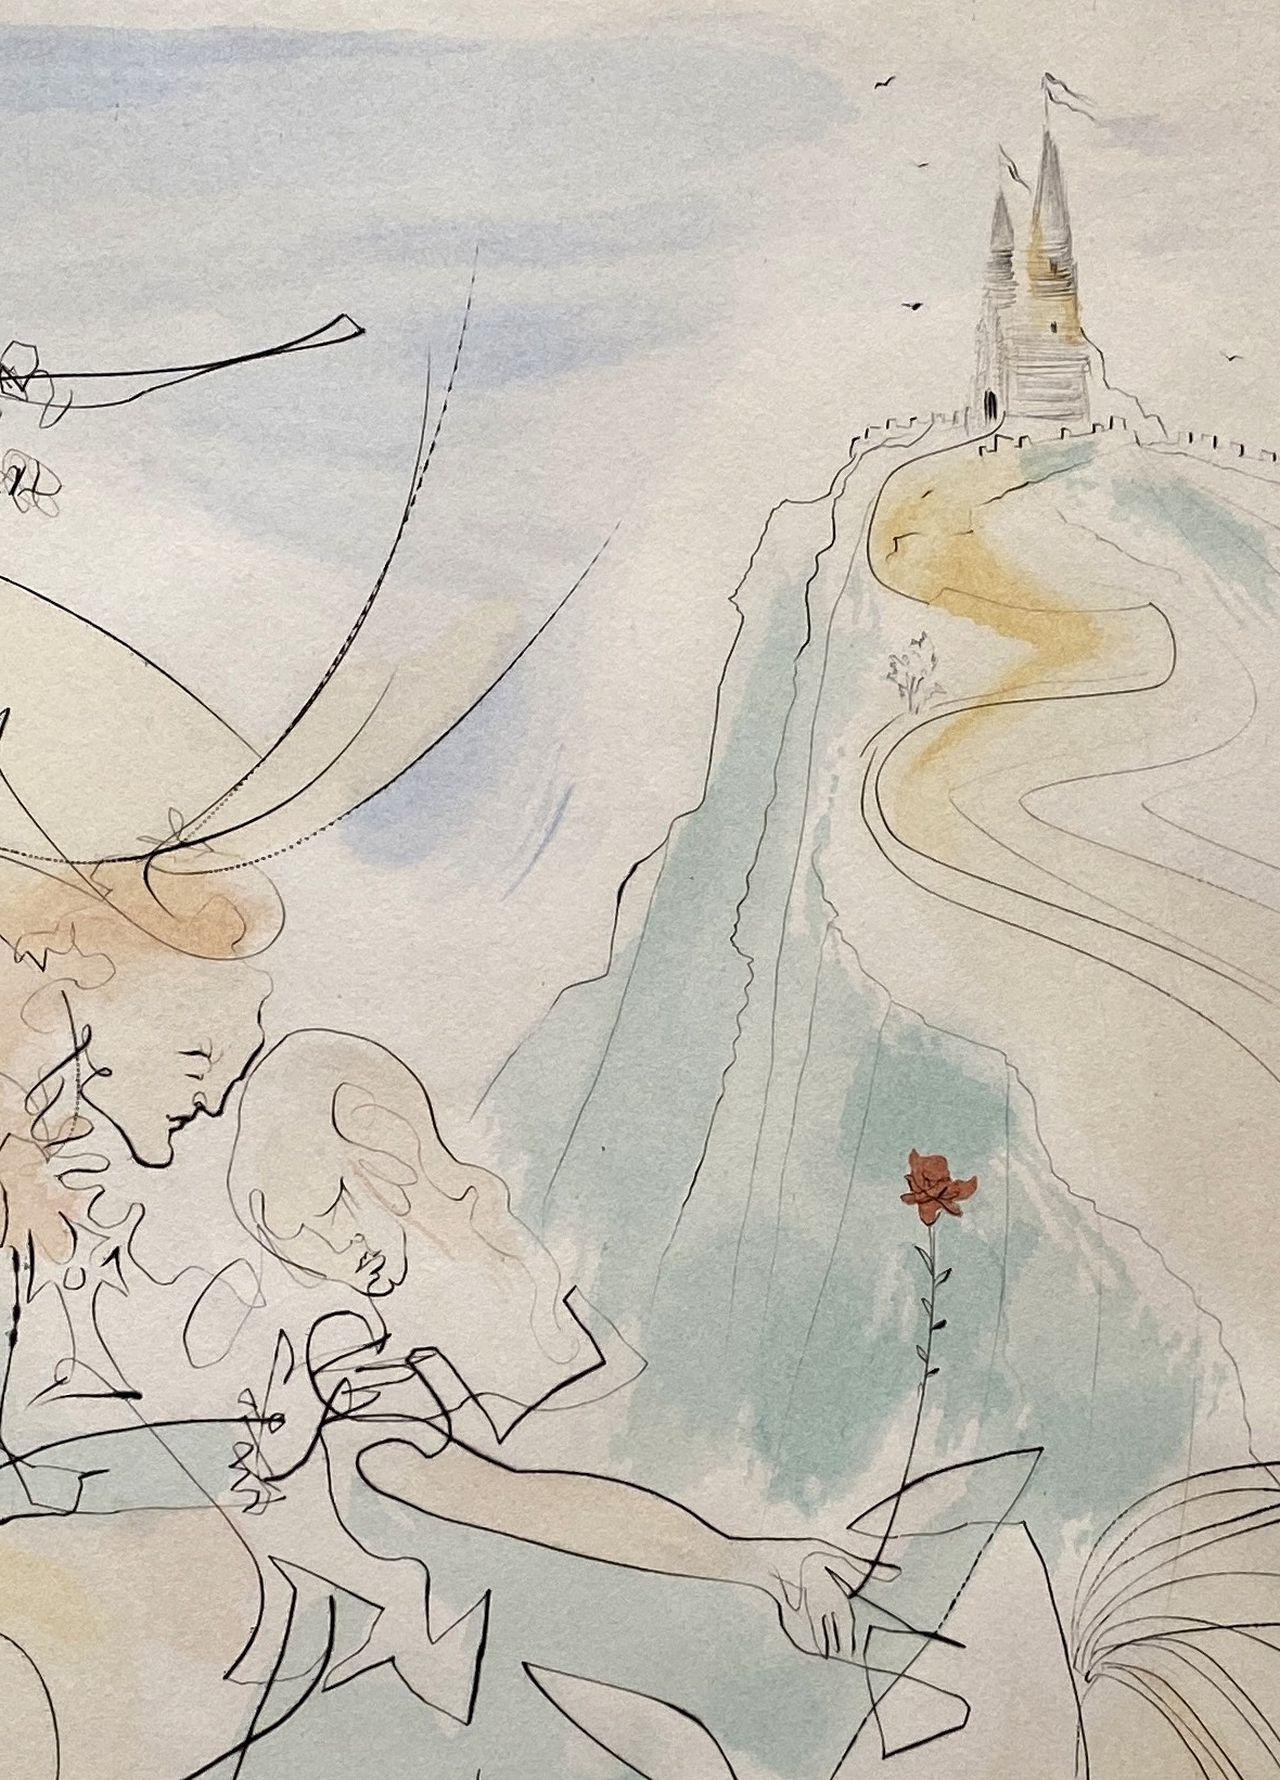 Salvador DALI
Couple with horse

Original etching, 1971
Hand signed in pencil by the artist
Numbered from a limited edition of 150 copies
On BFK Rives vellum, size 75 x 56 cm (c. 30 x 22 in)
Good condition (fresh colors but margins are